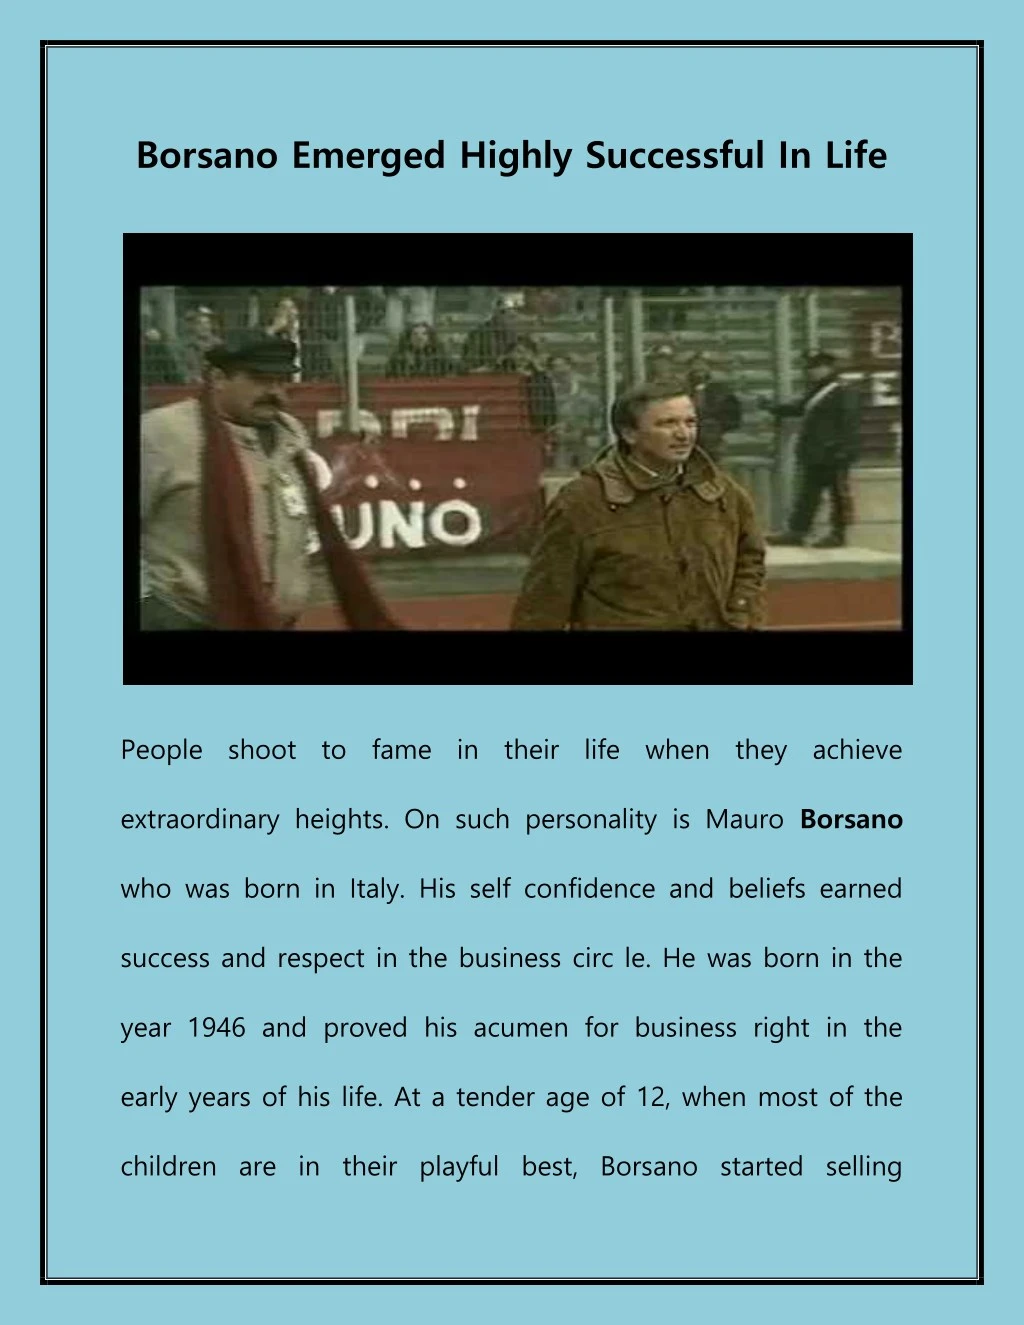 borsano emerged highly successful in life